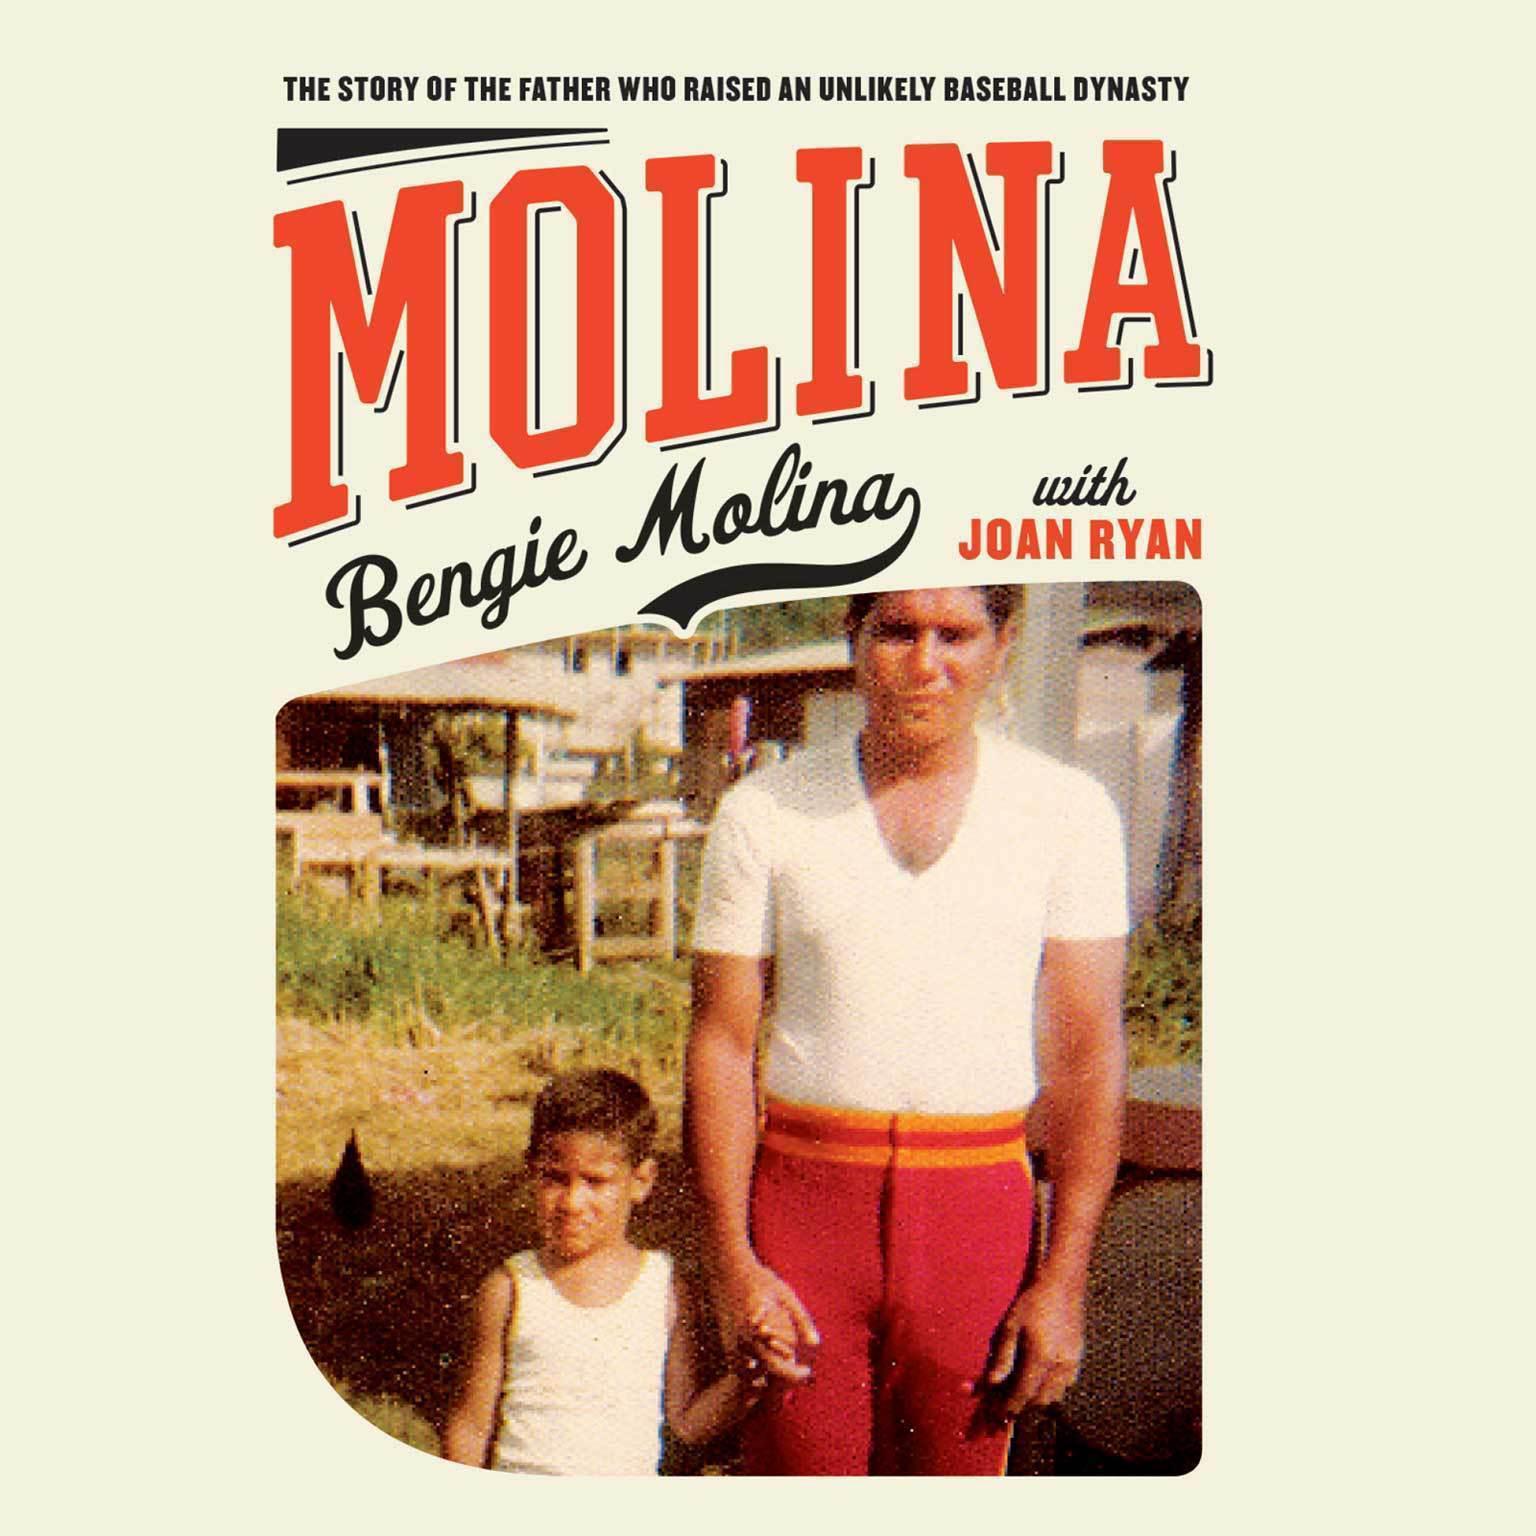 Molina: The Story of the Father Who Raised an Unlikely Baseball Dynasty Audiobook, by Bengie Molina